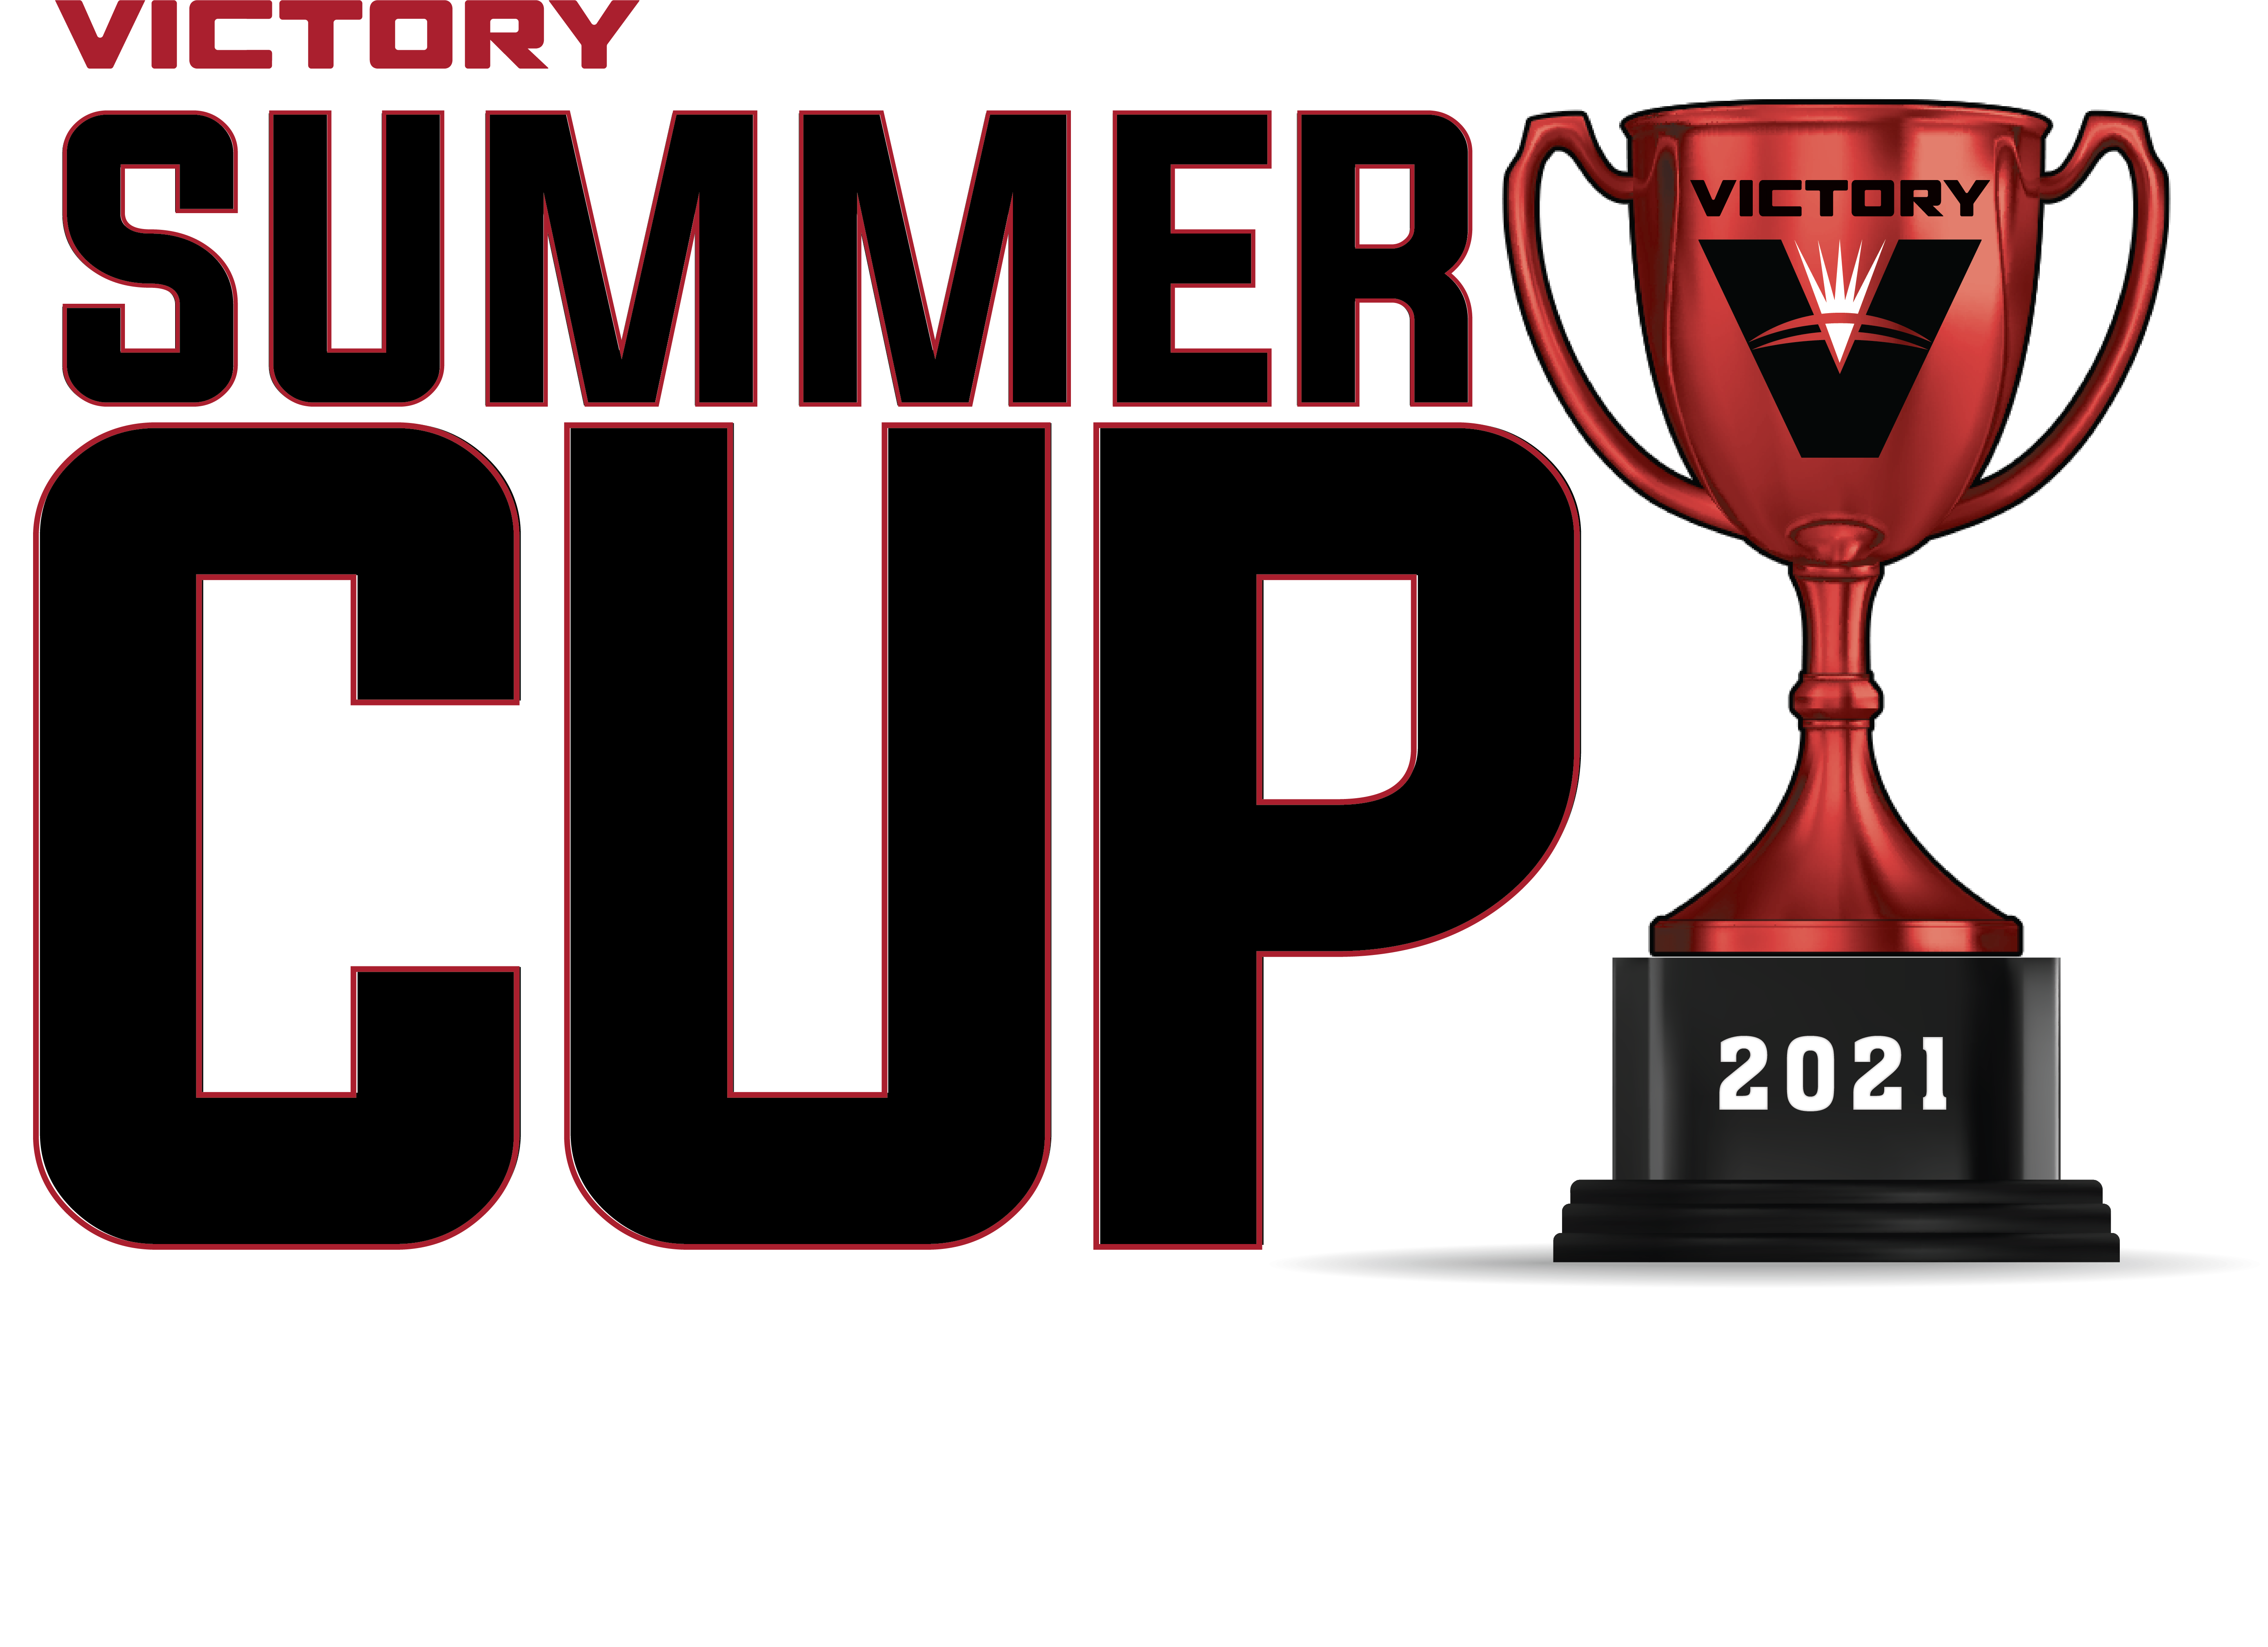 Victory Summer Cup